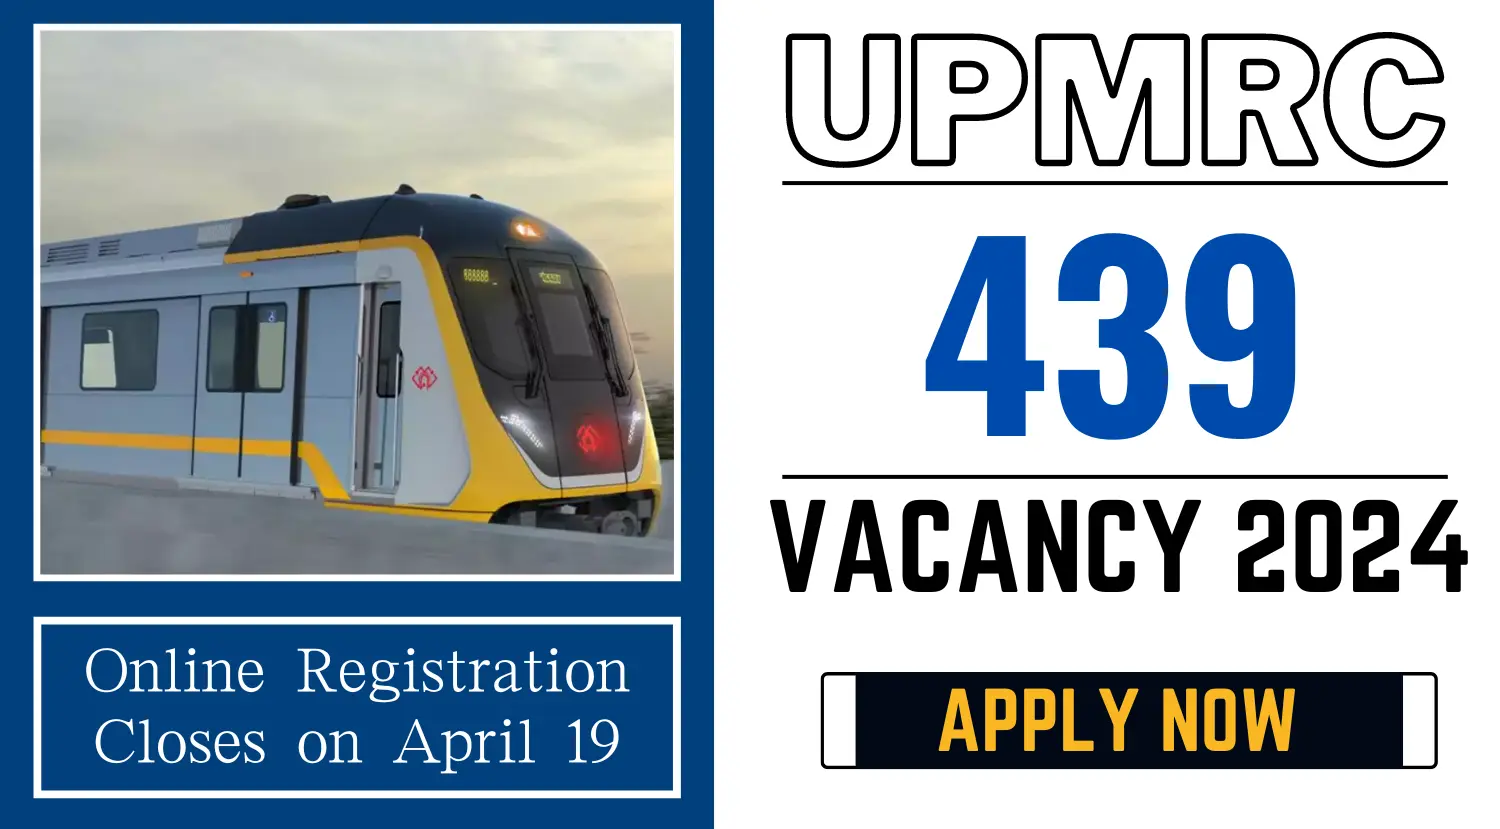 UPMRC 439 Vacancy 2024 Online Registration Closes on April 19 Check Details Here